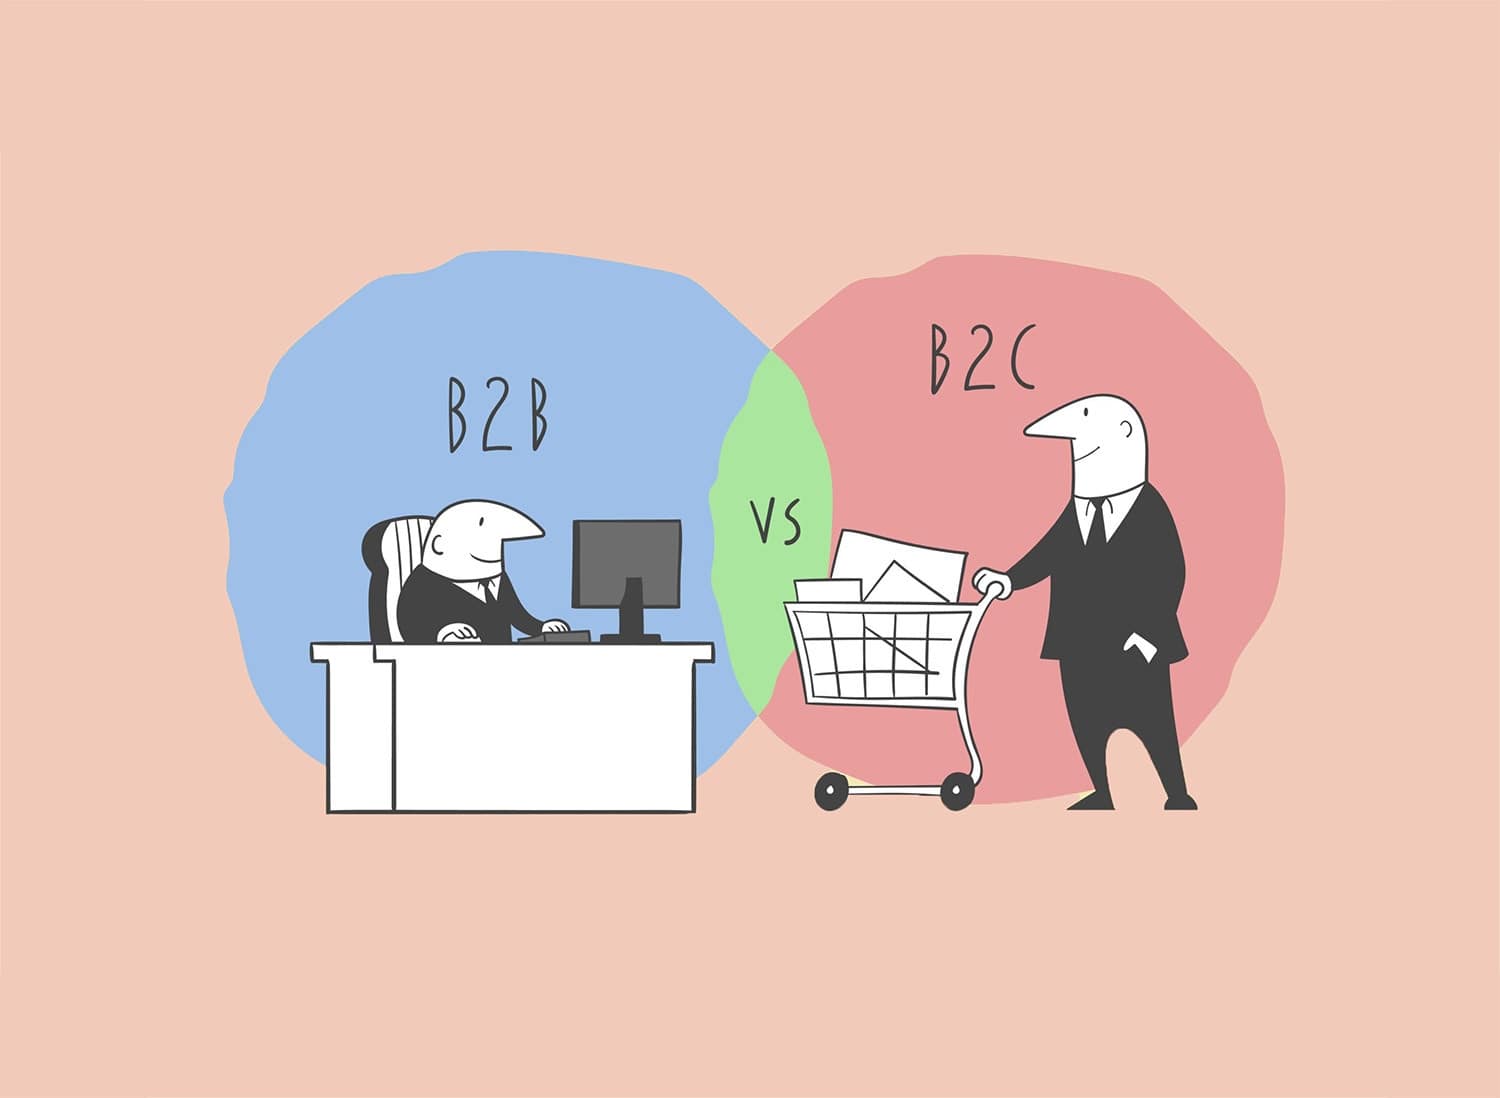 What are the key differences between B2B vs. B2C content marketing?